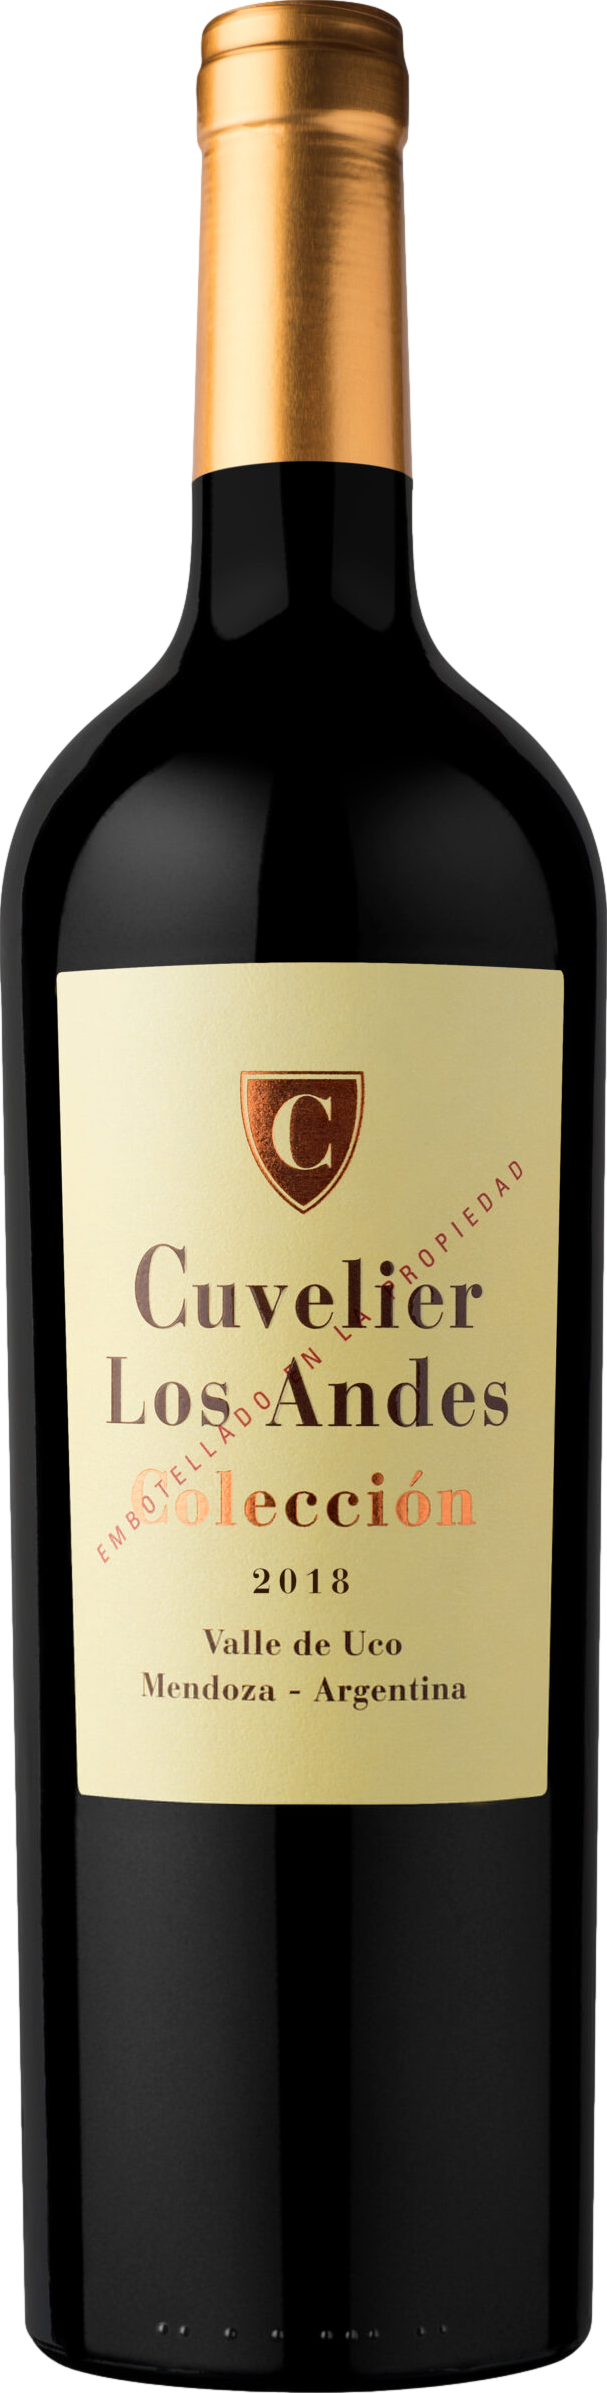 Cuvelier Los Andes Coleccion 2018 Cuvelier Family 8wines DACH